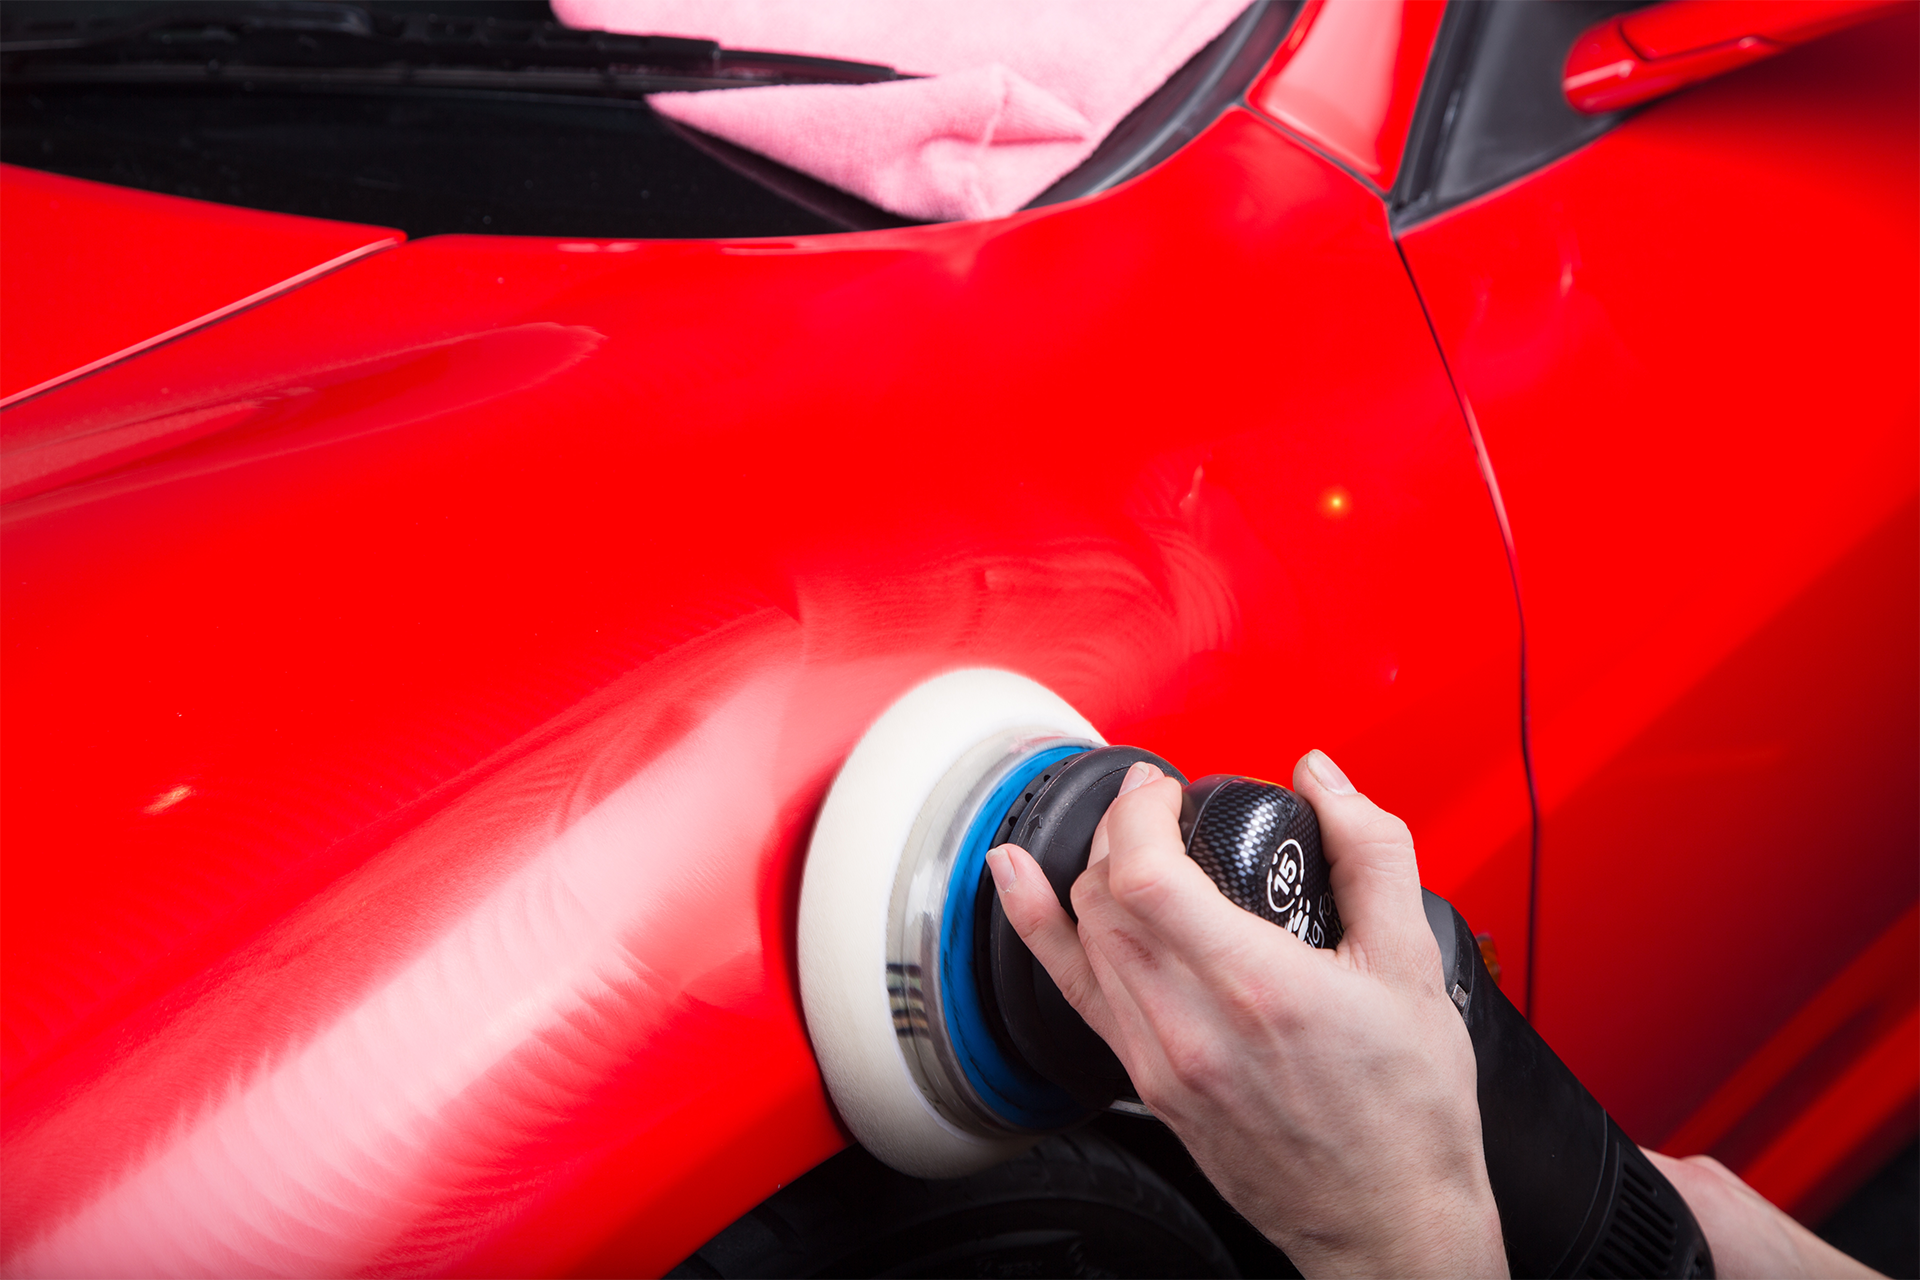 Learn how to remove swirl marks in clear coat from the Expert